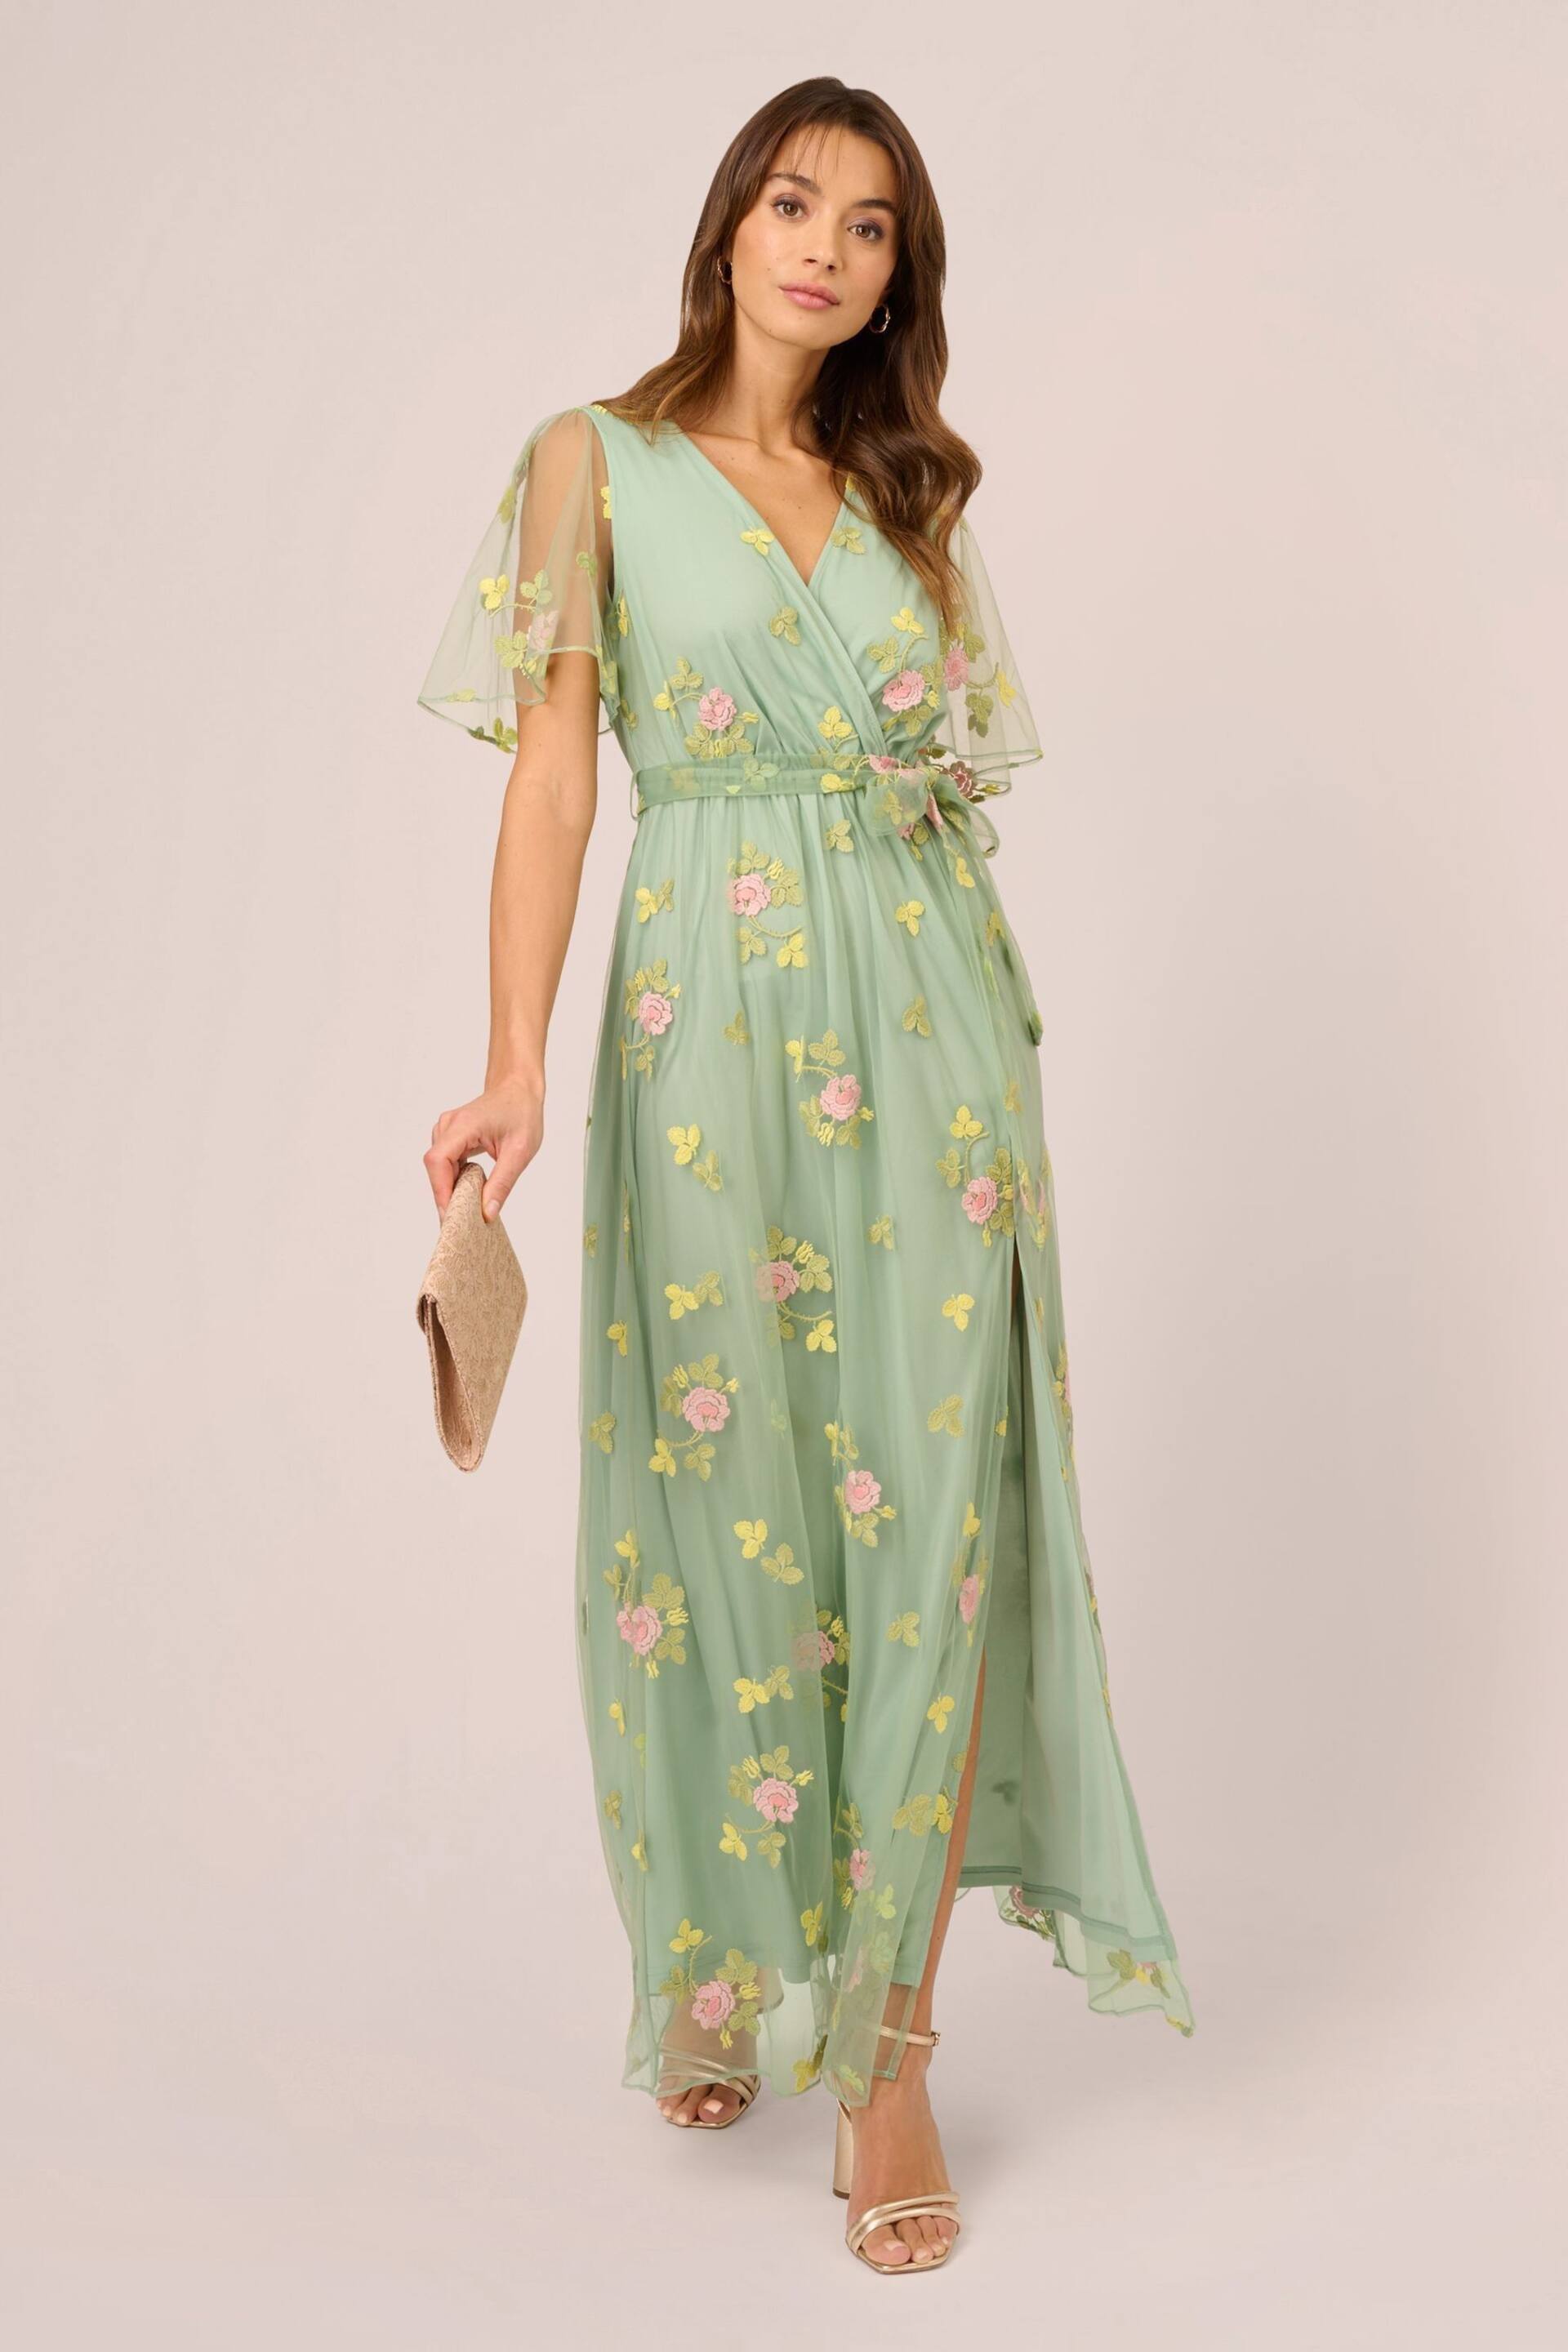 Adrianna Papell Green Embroidered Maxi Dress - Image 3 of 7